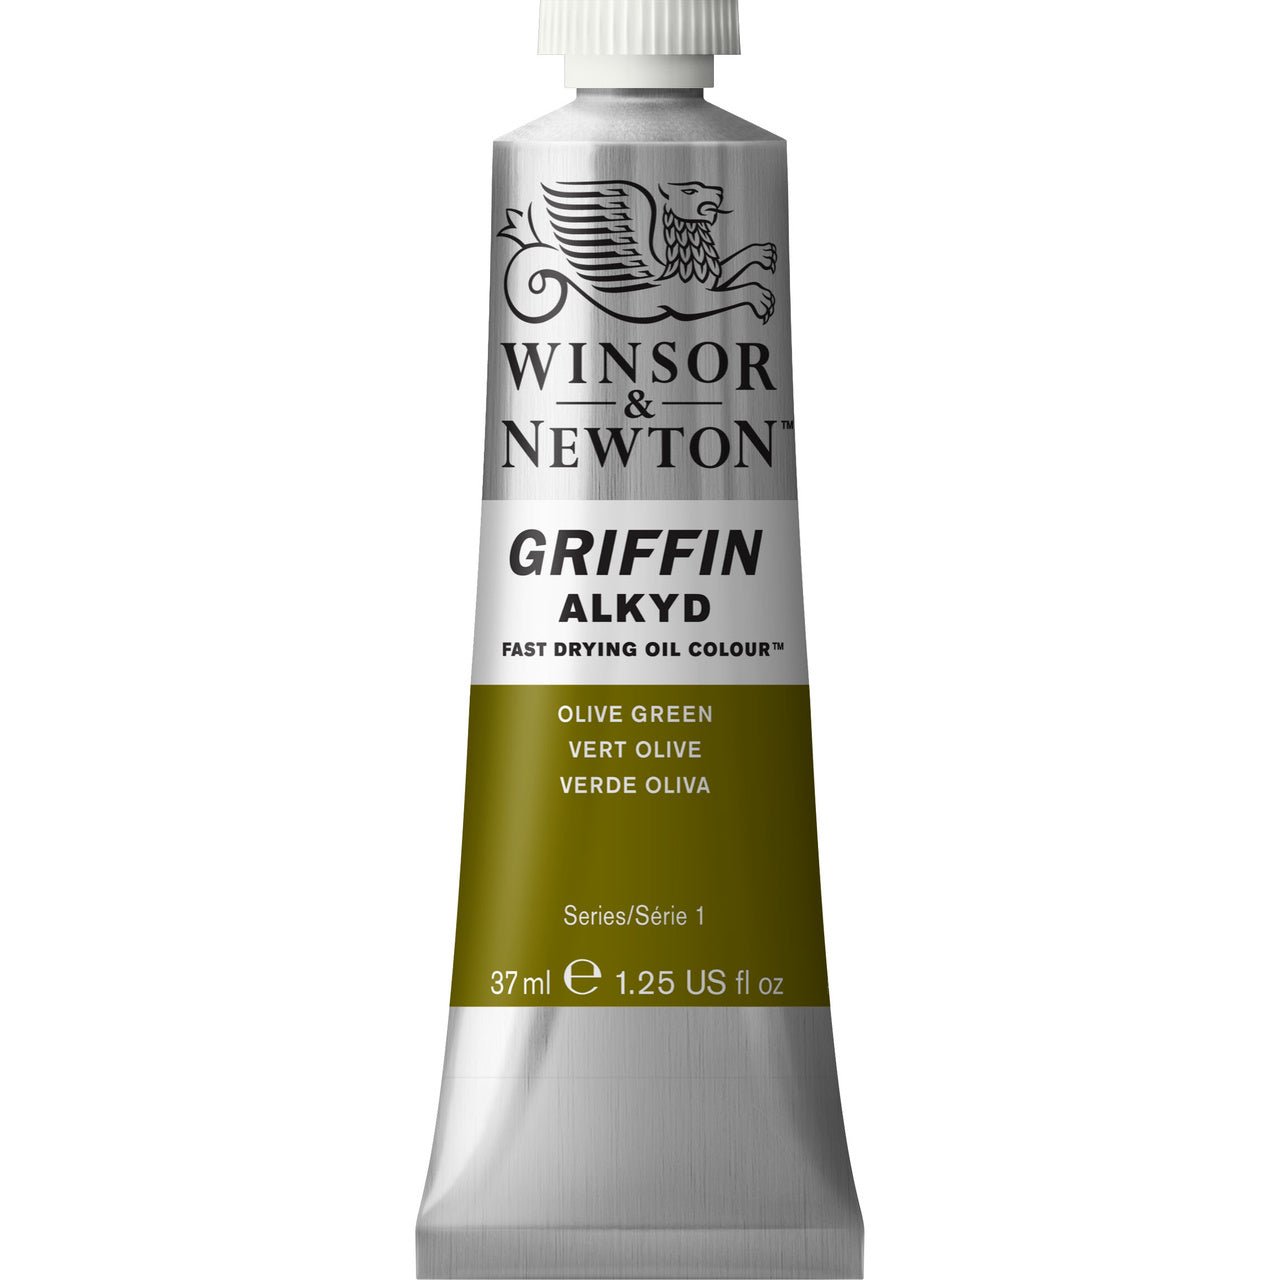 Winsor & Newton Griffin Alkyd 37ml Olive Green - merriartist.com